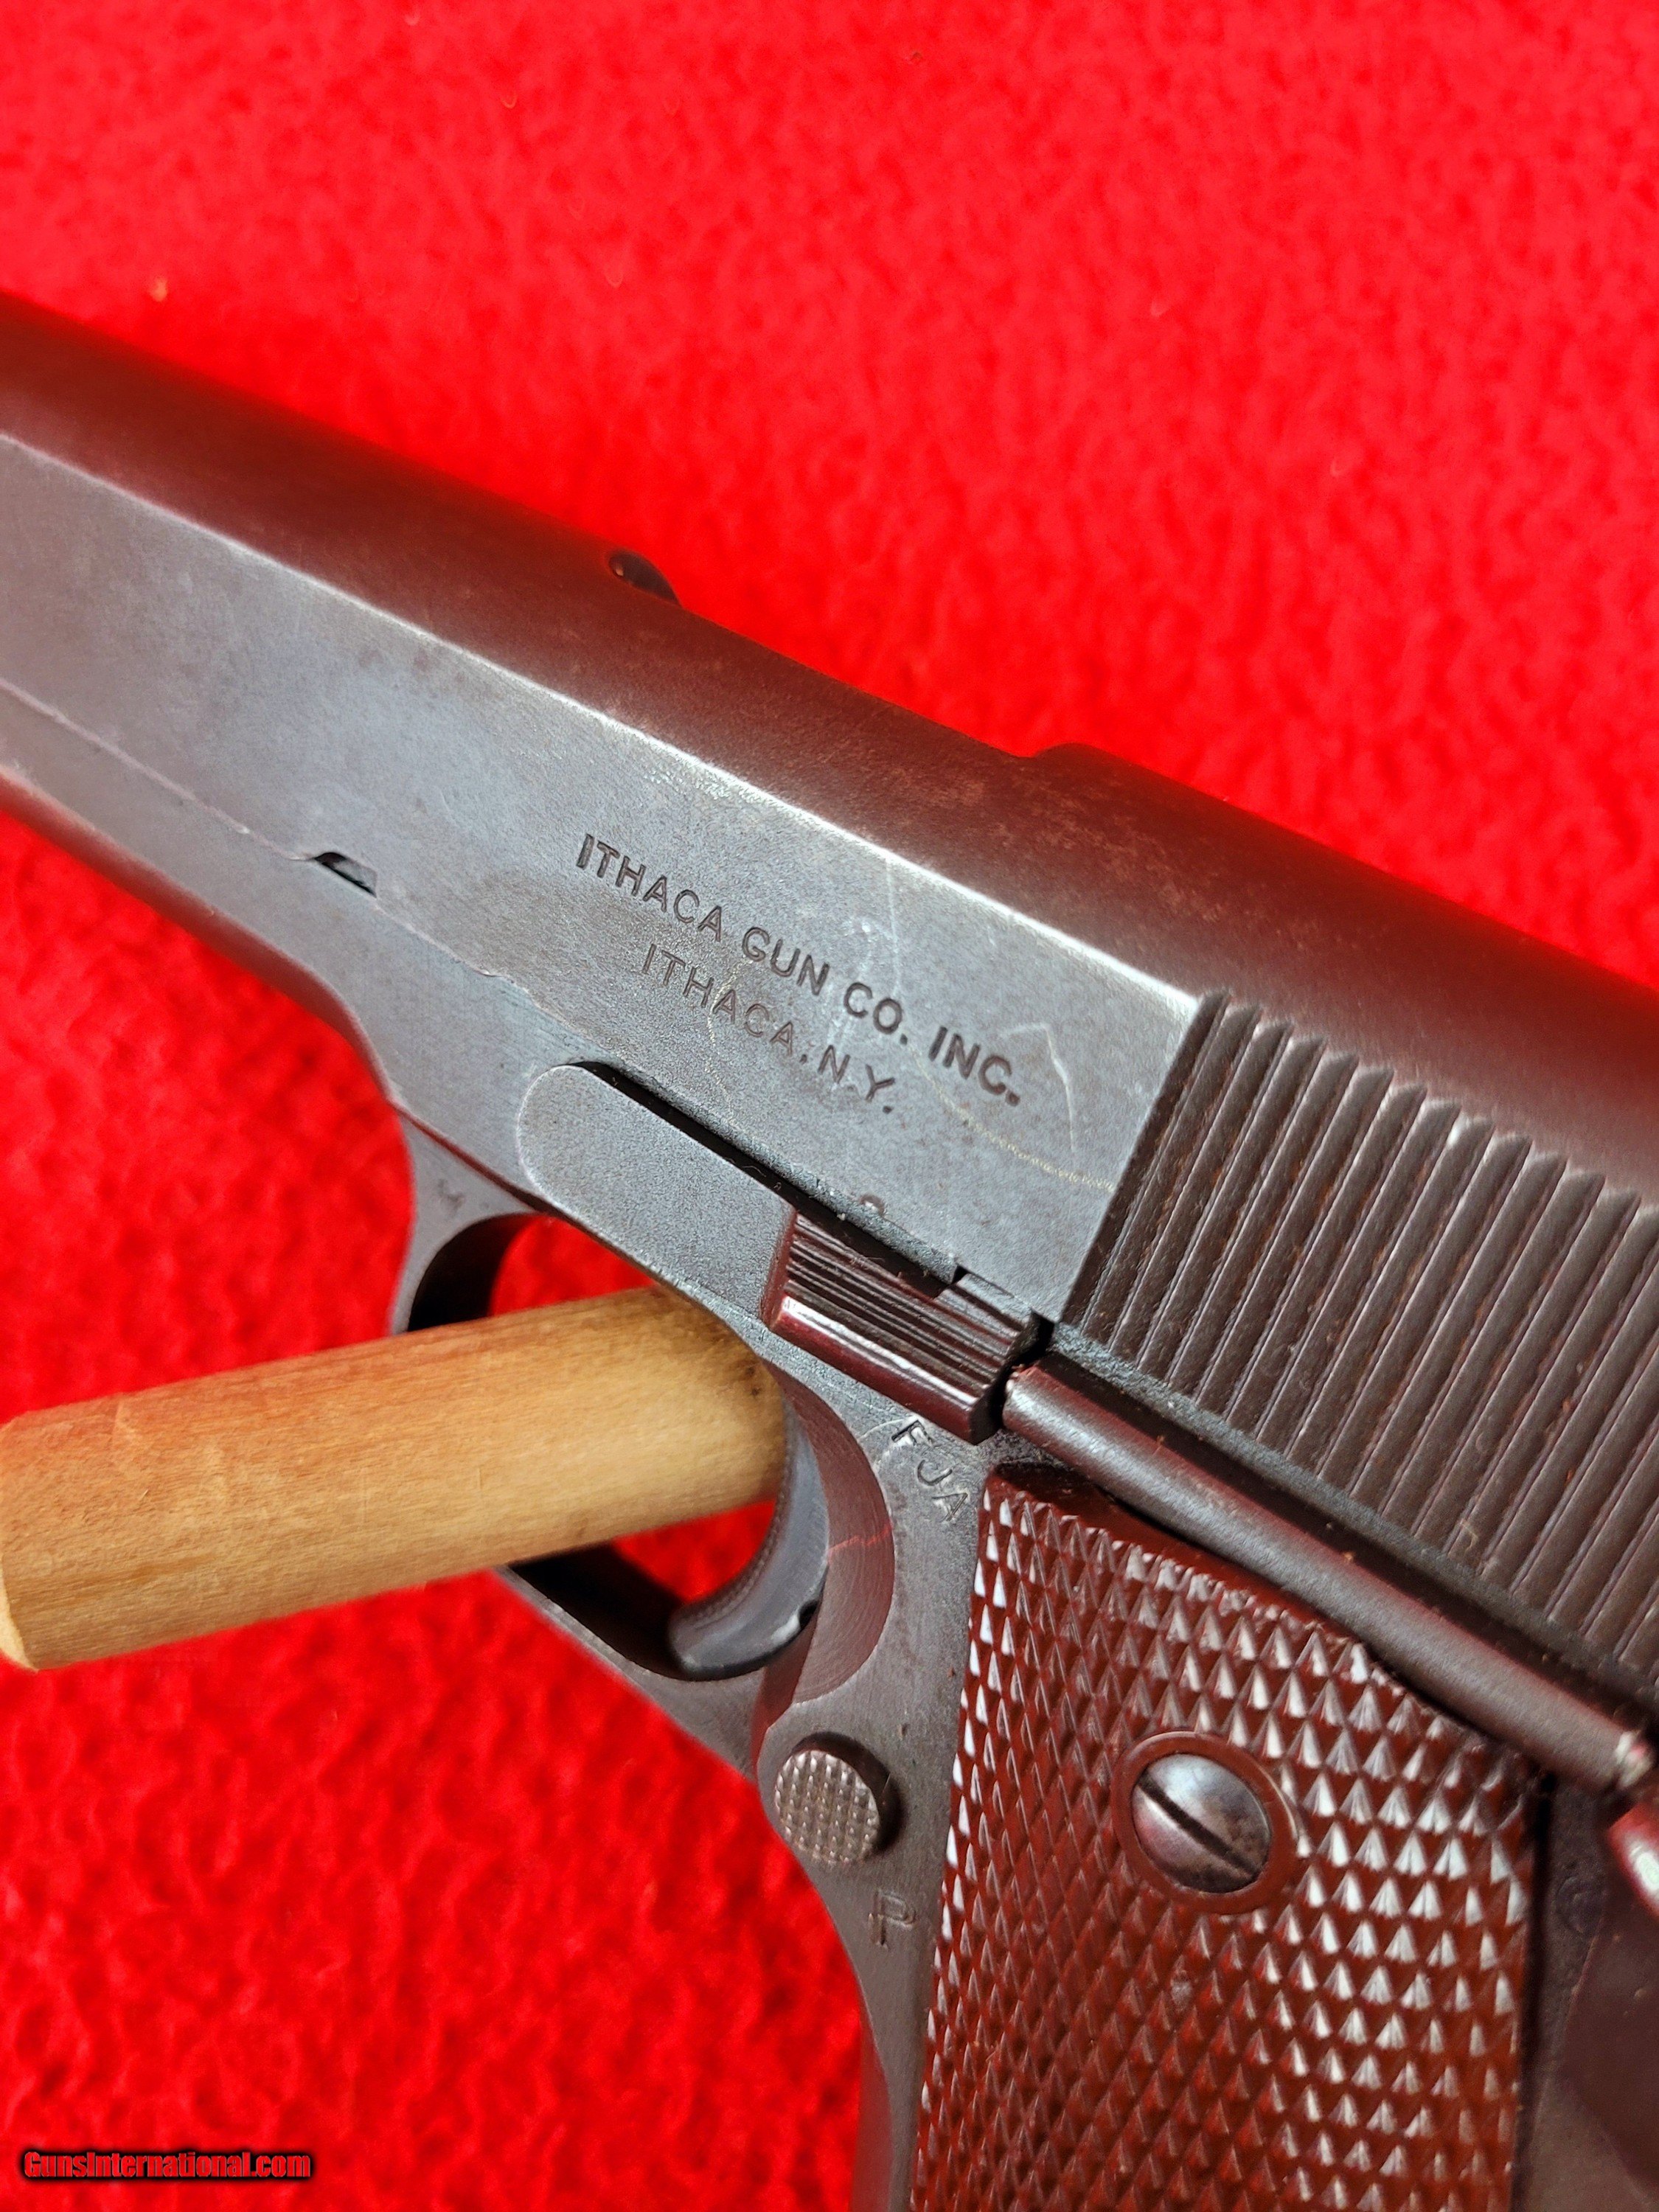 Ithaca Double Stamp 1911 A1 - October 1943 Production